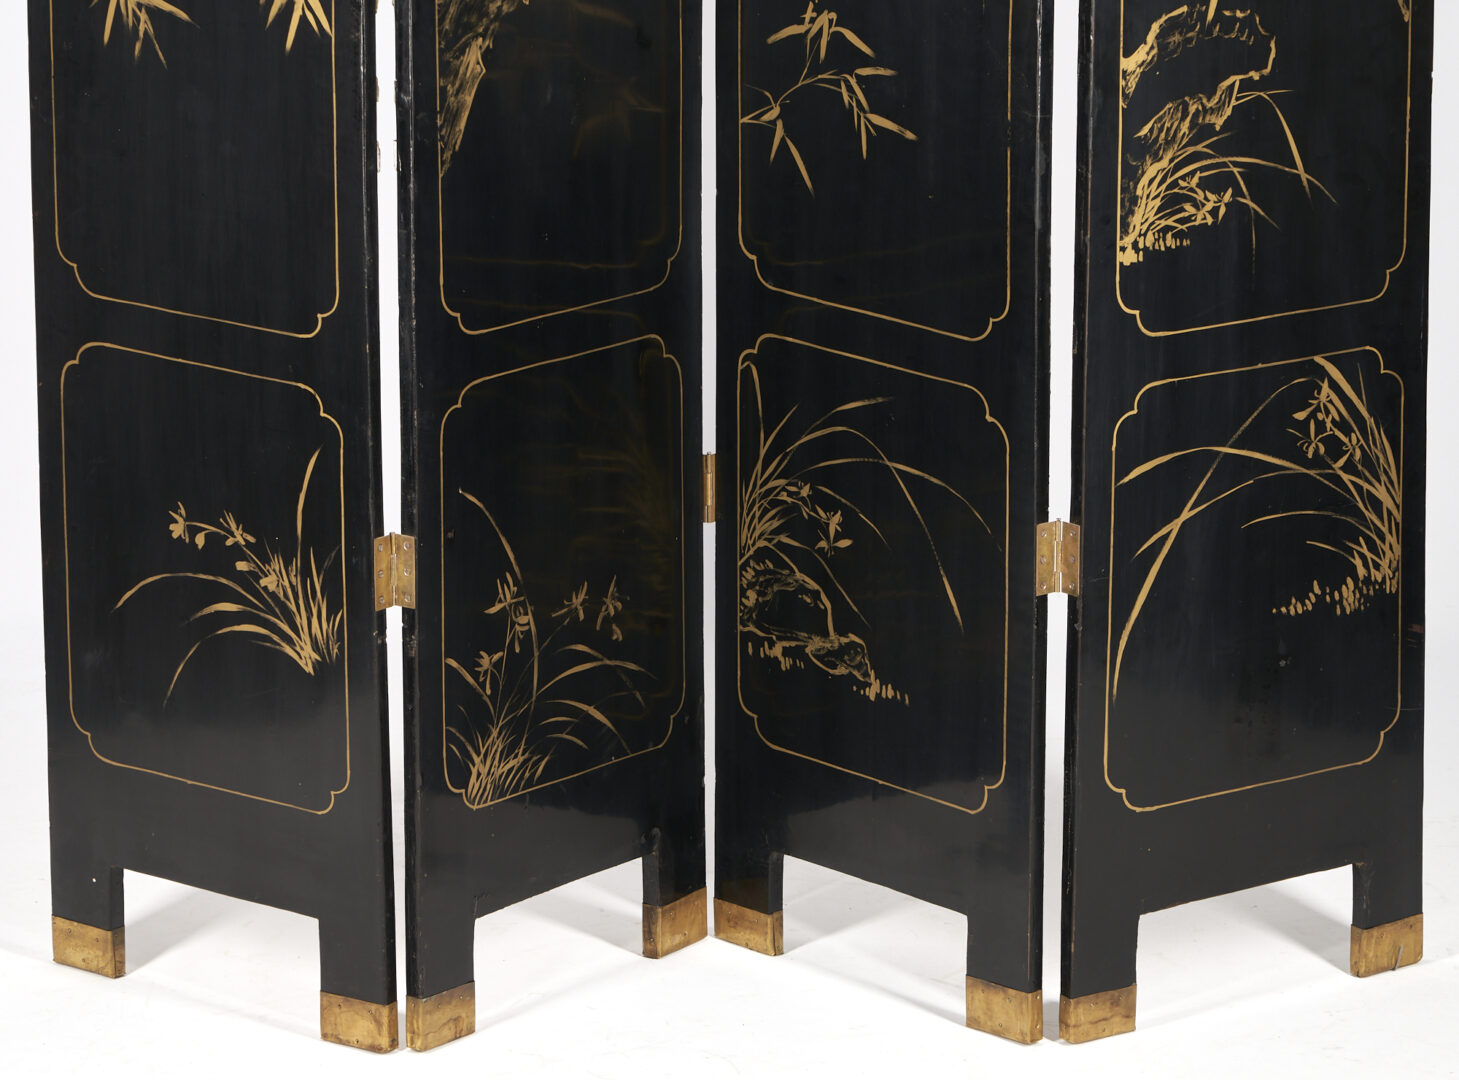 Lot 242: Chinese 4-Panel Inlaid & Hardstone Lacquer Screen